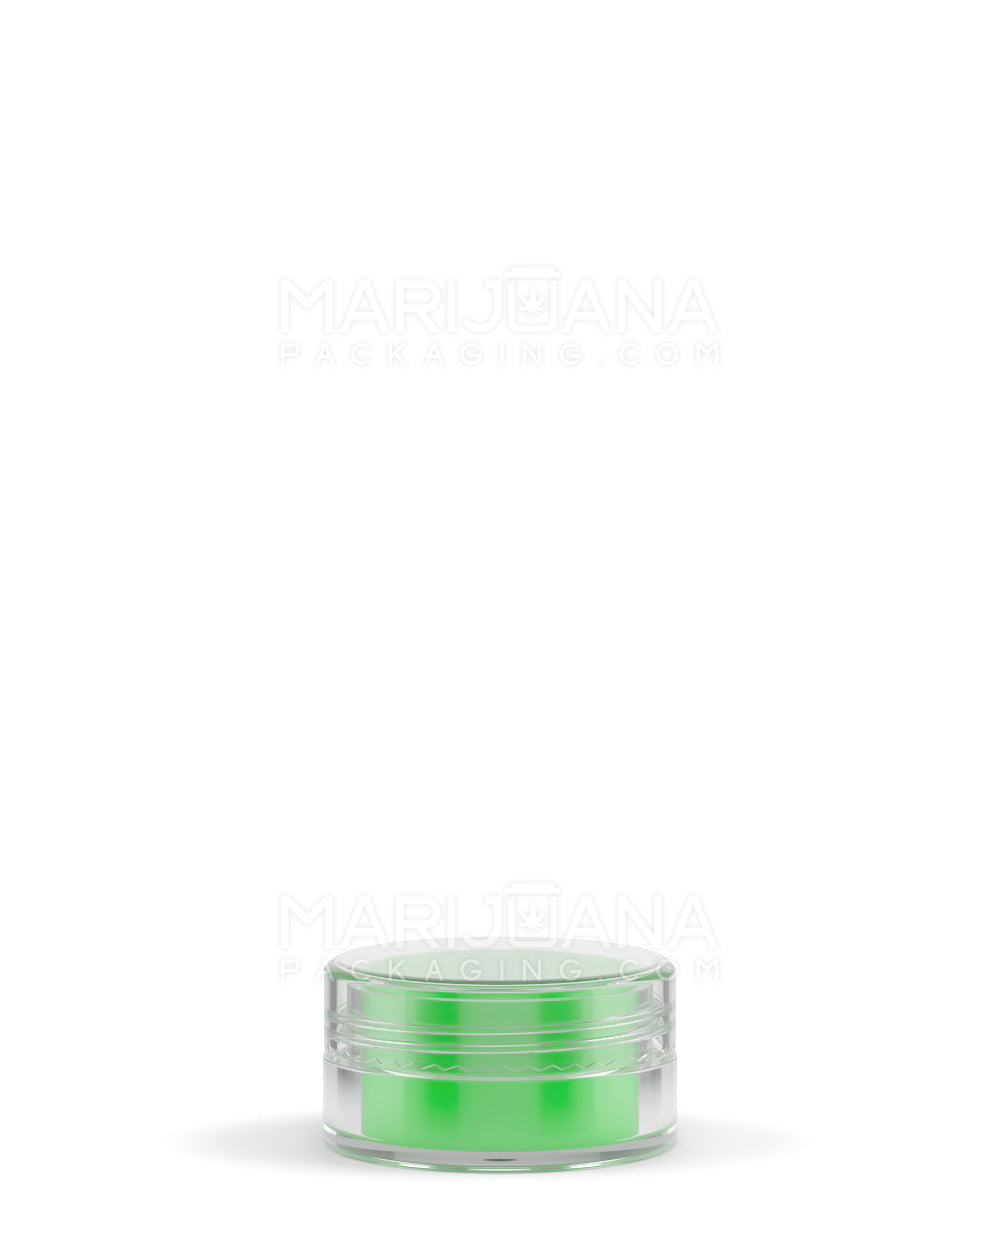 Clear Concentrate Containers w/ Screw Top Cap & Green Silicone Insert | 5mL - Plastic | Sample - 2